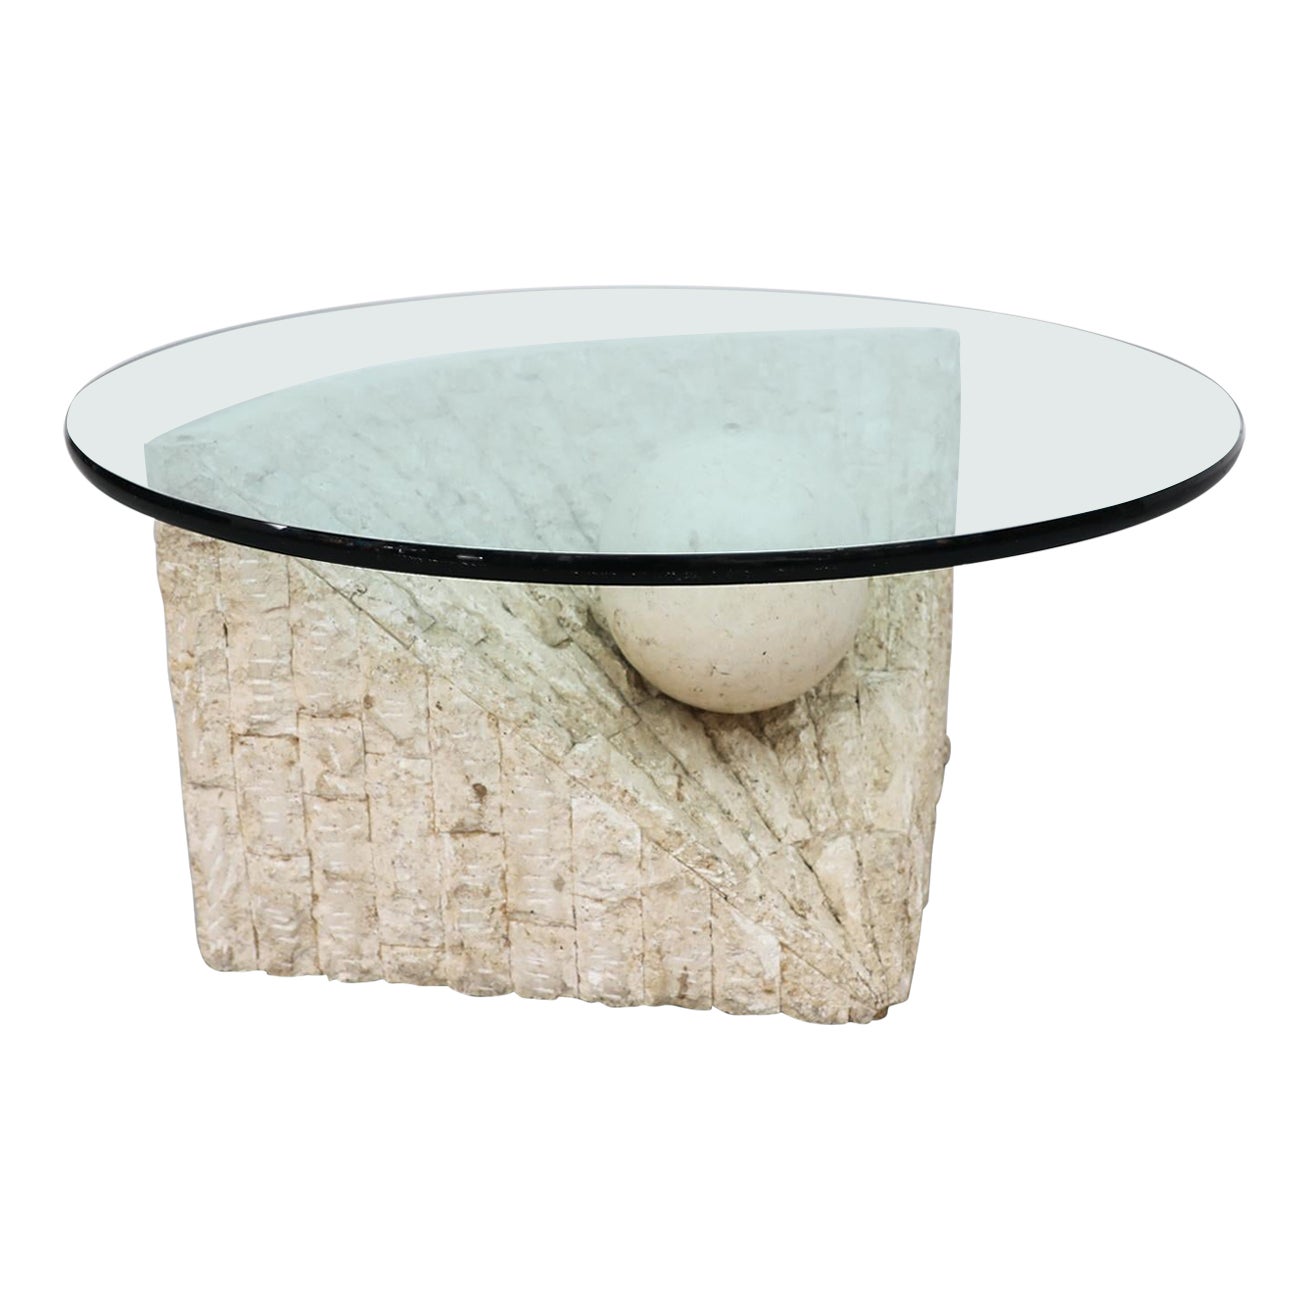 Post-Modern Tessellated Stone Coffee Table with Glass by Magnussen Ponte, 1995